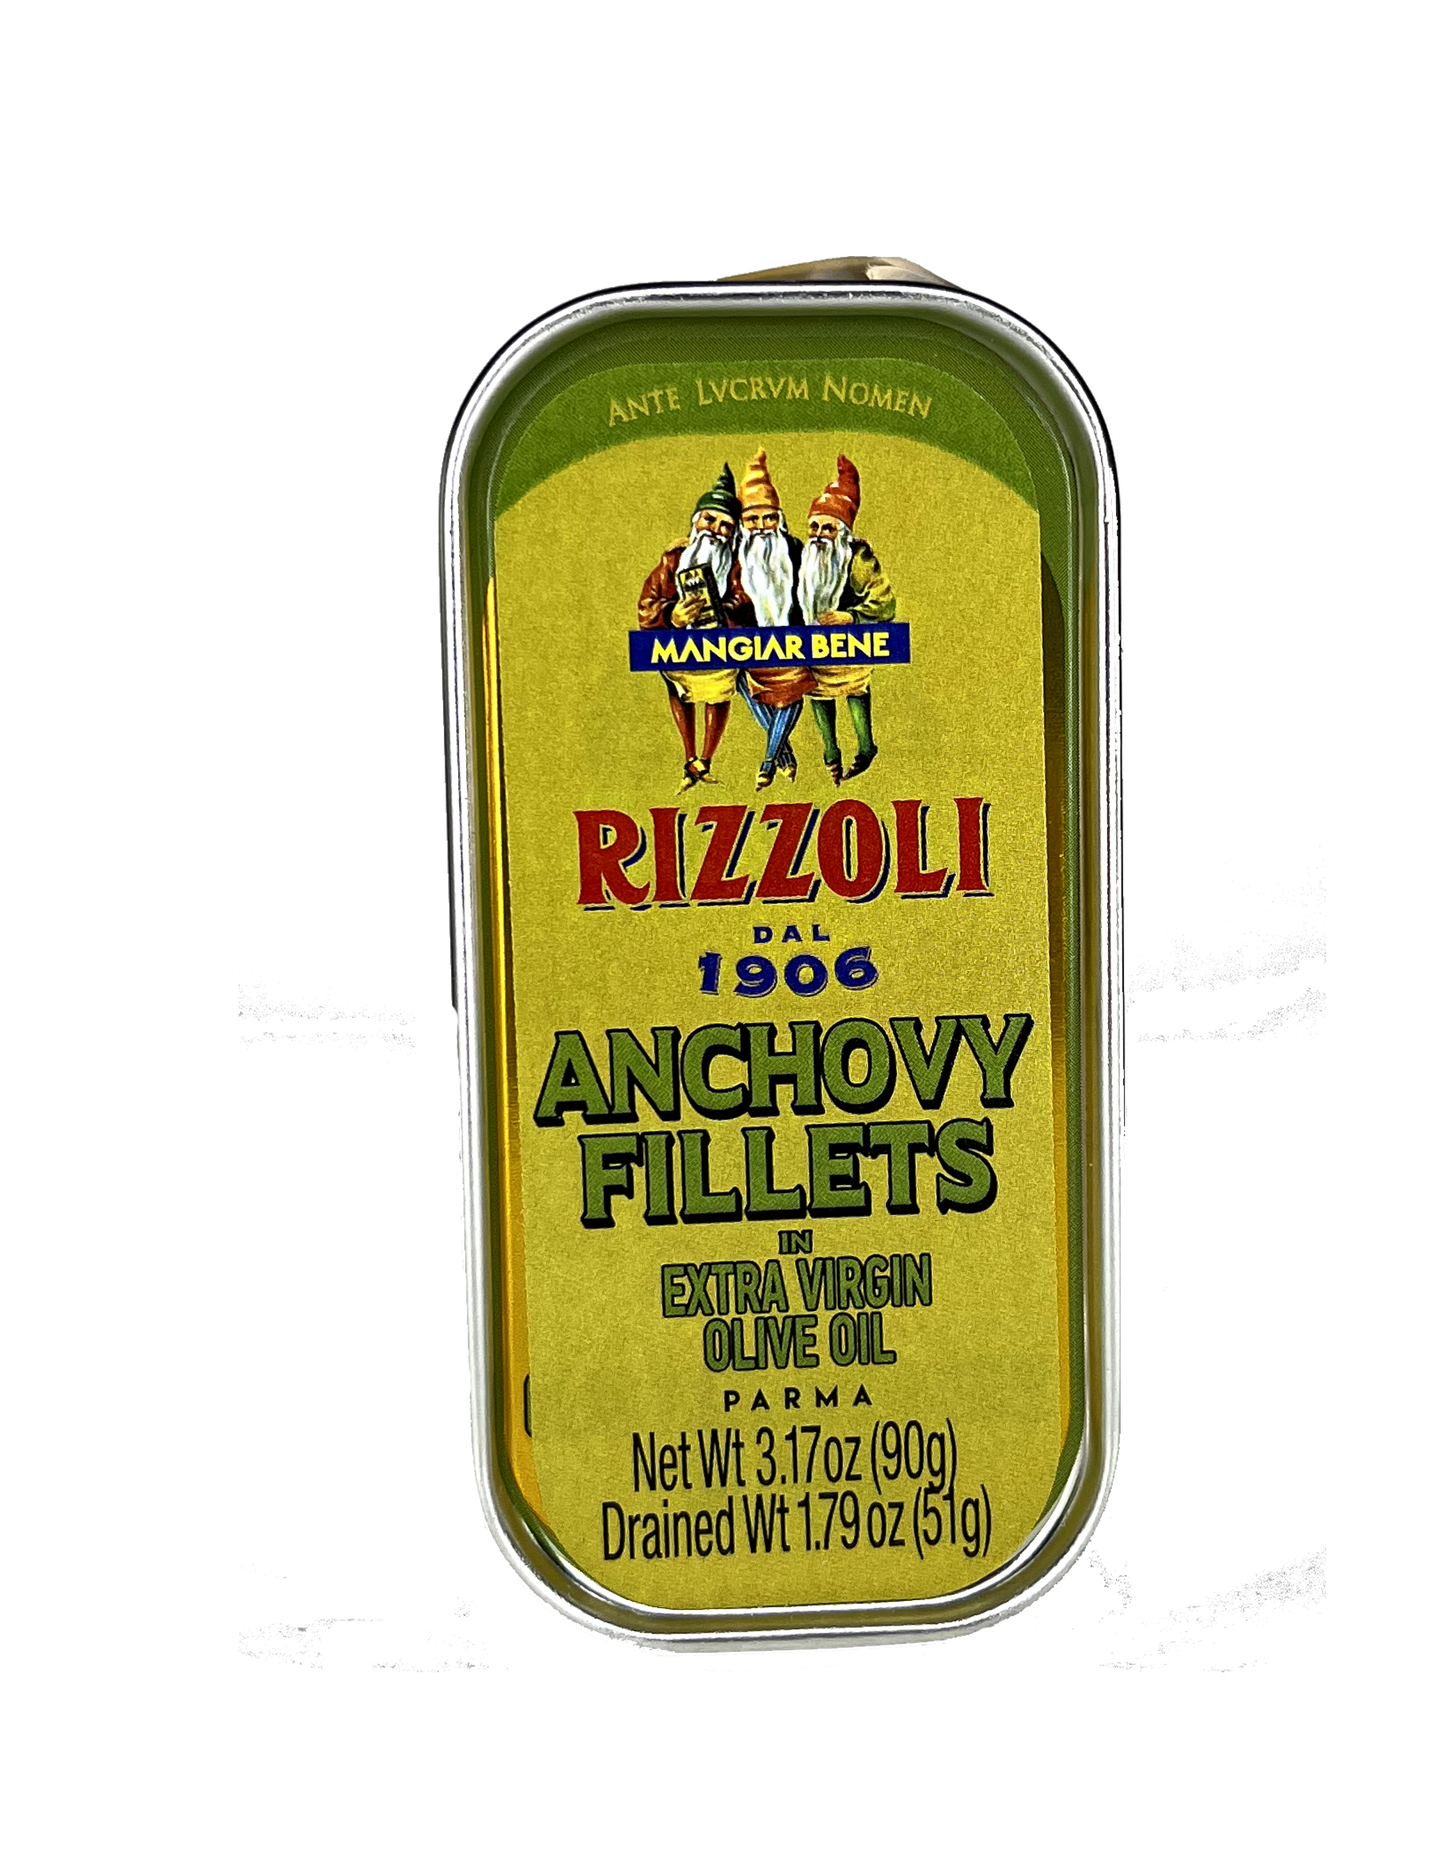 Anchovy fillets